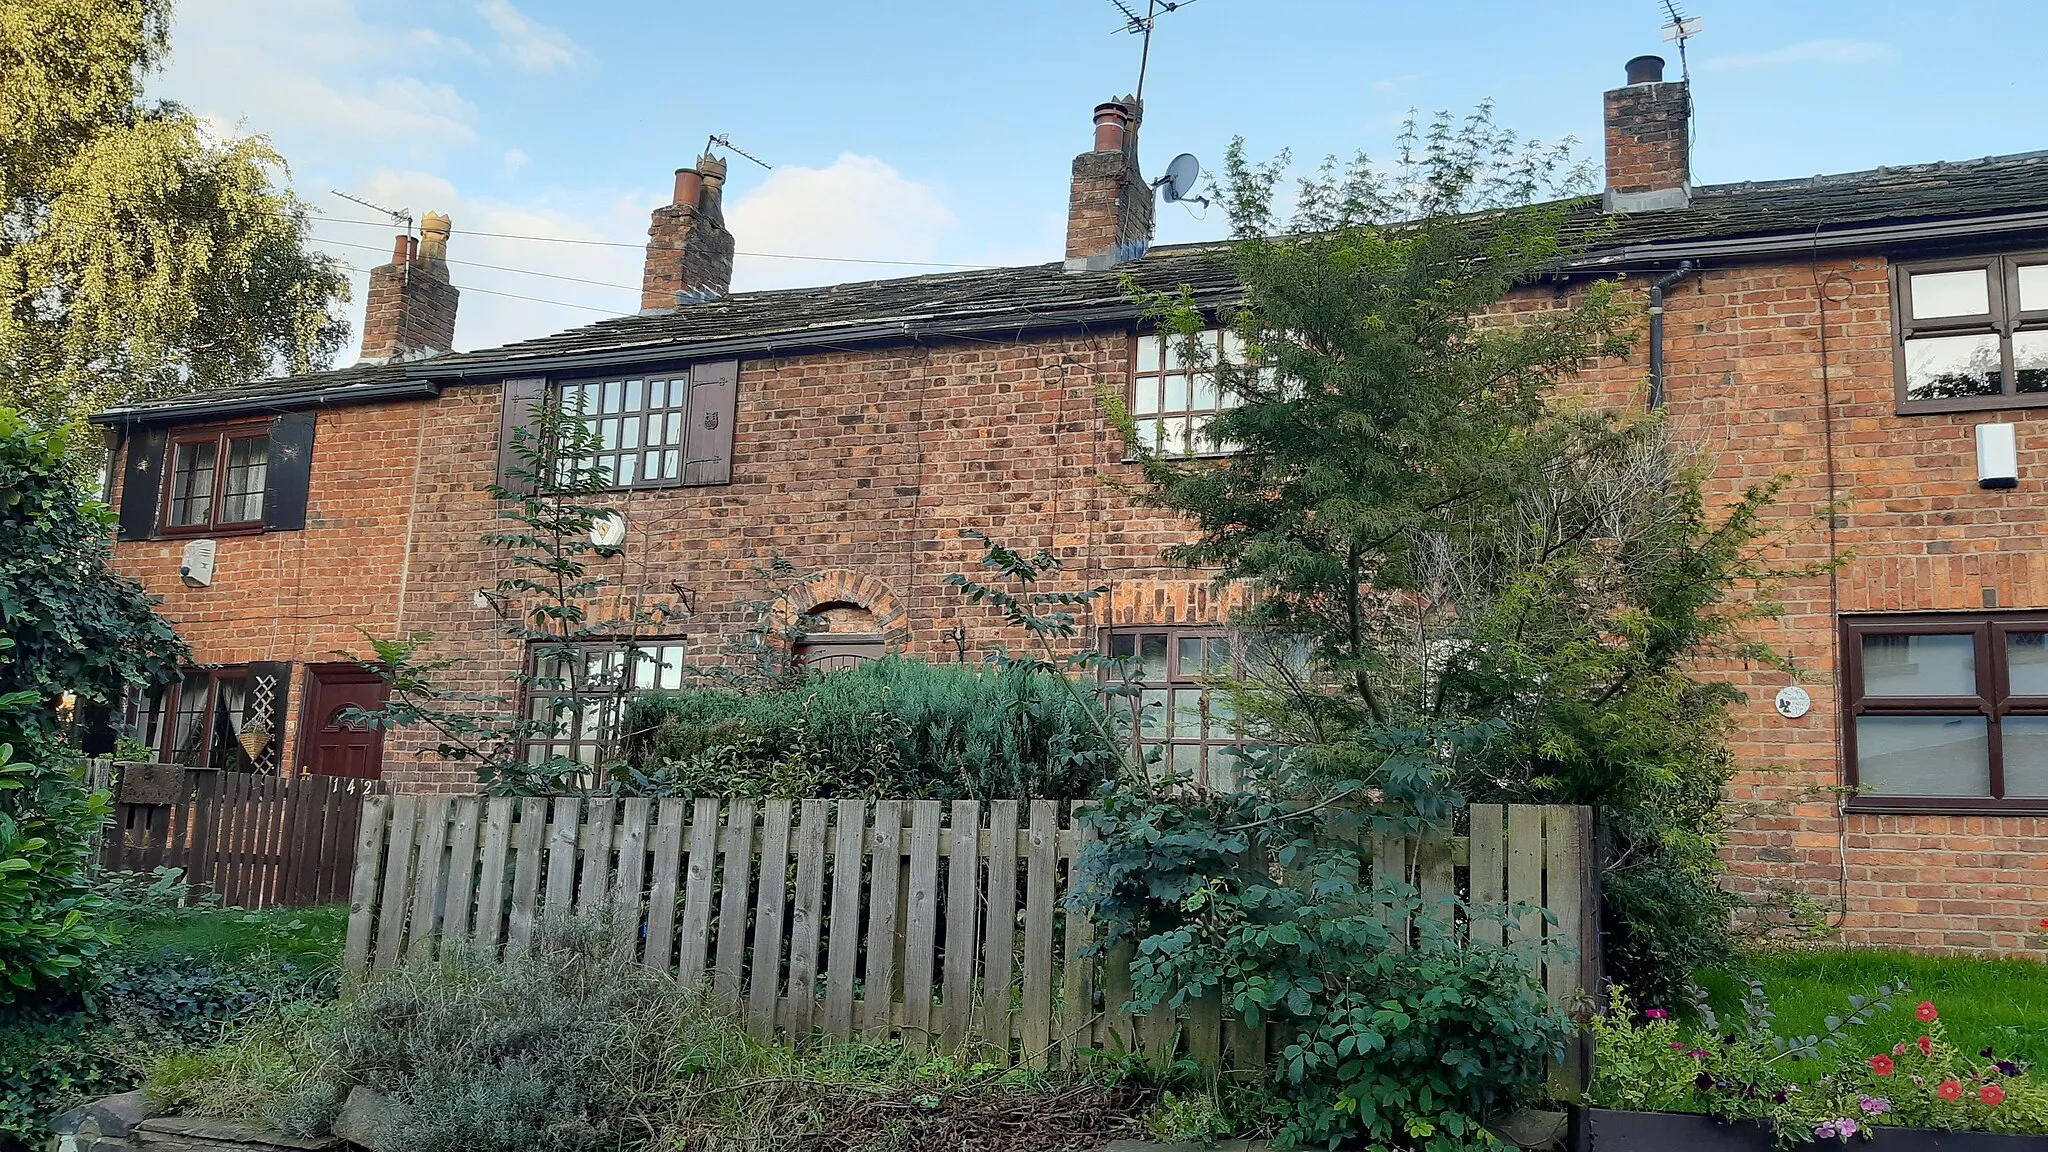 Photo showing: This is a picture of a row of red/pink brick houses constructed in the Victorian era in the Suburb of Higher Blackley in the British city of Manchester.